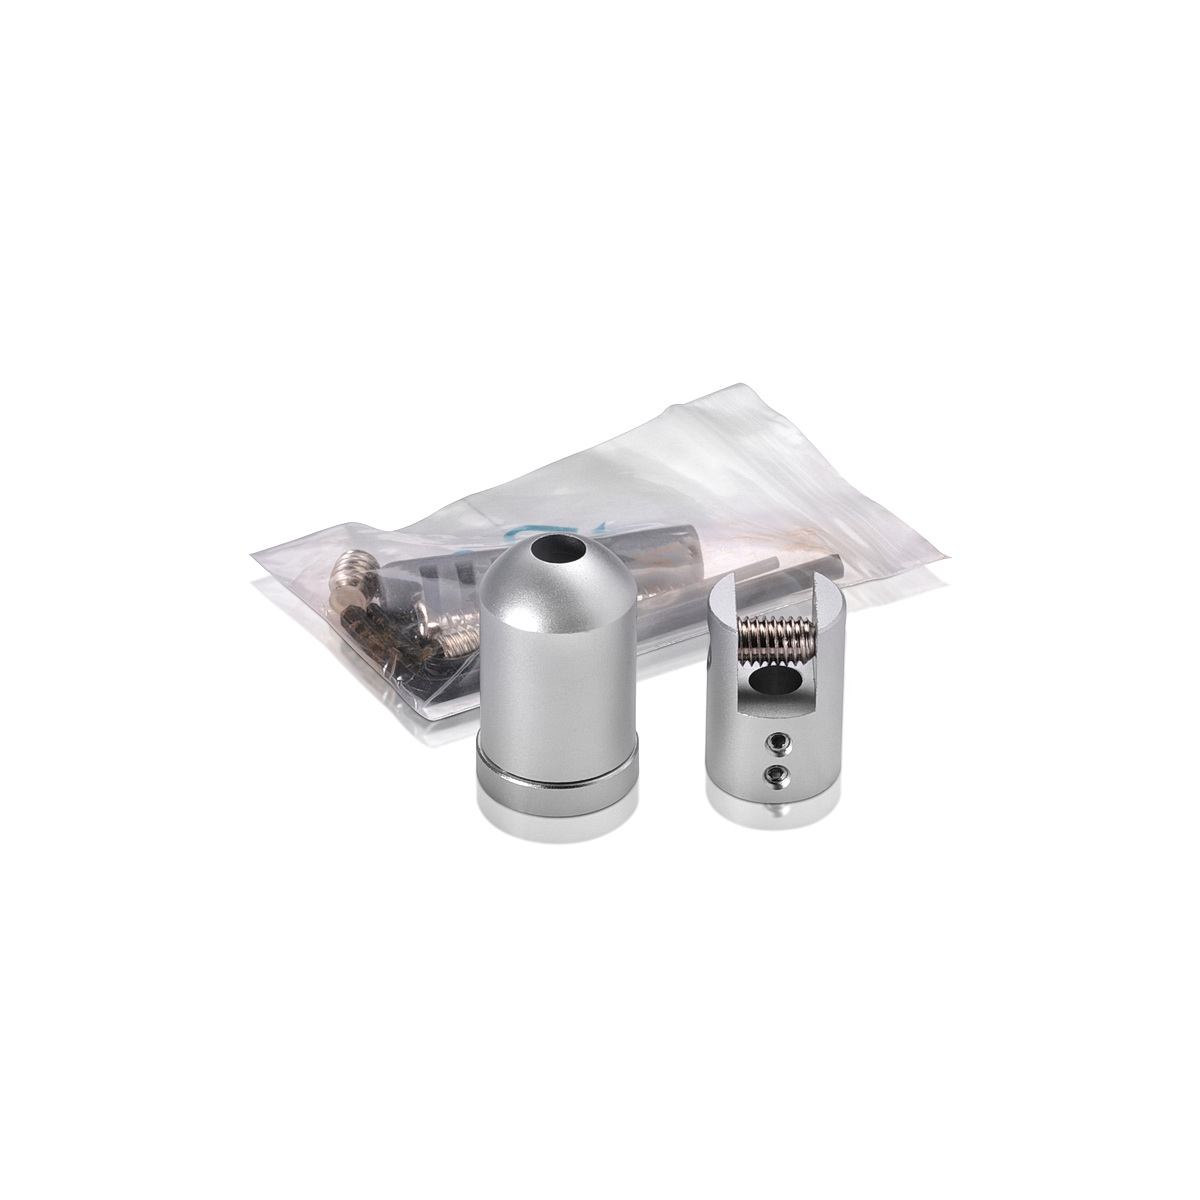 Ceiling Suspended Kit for 1/4'' Diameter Rod - Clear Anodized Aluminum Finish (Sold without Rod)